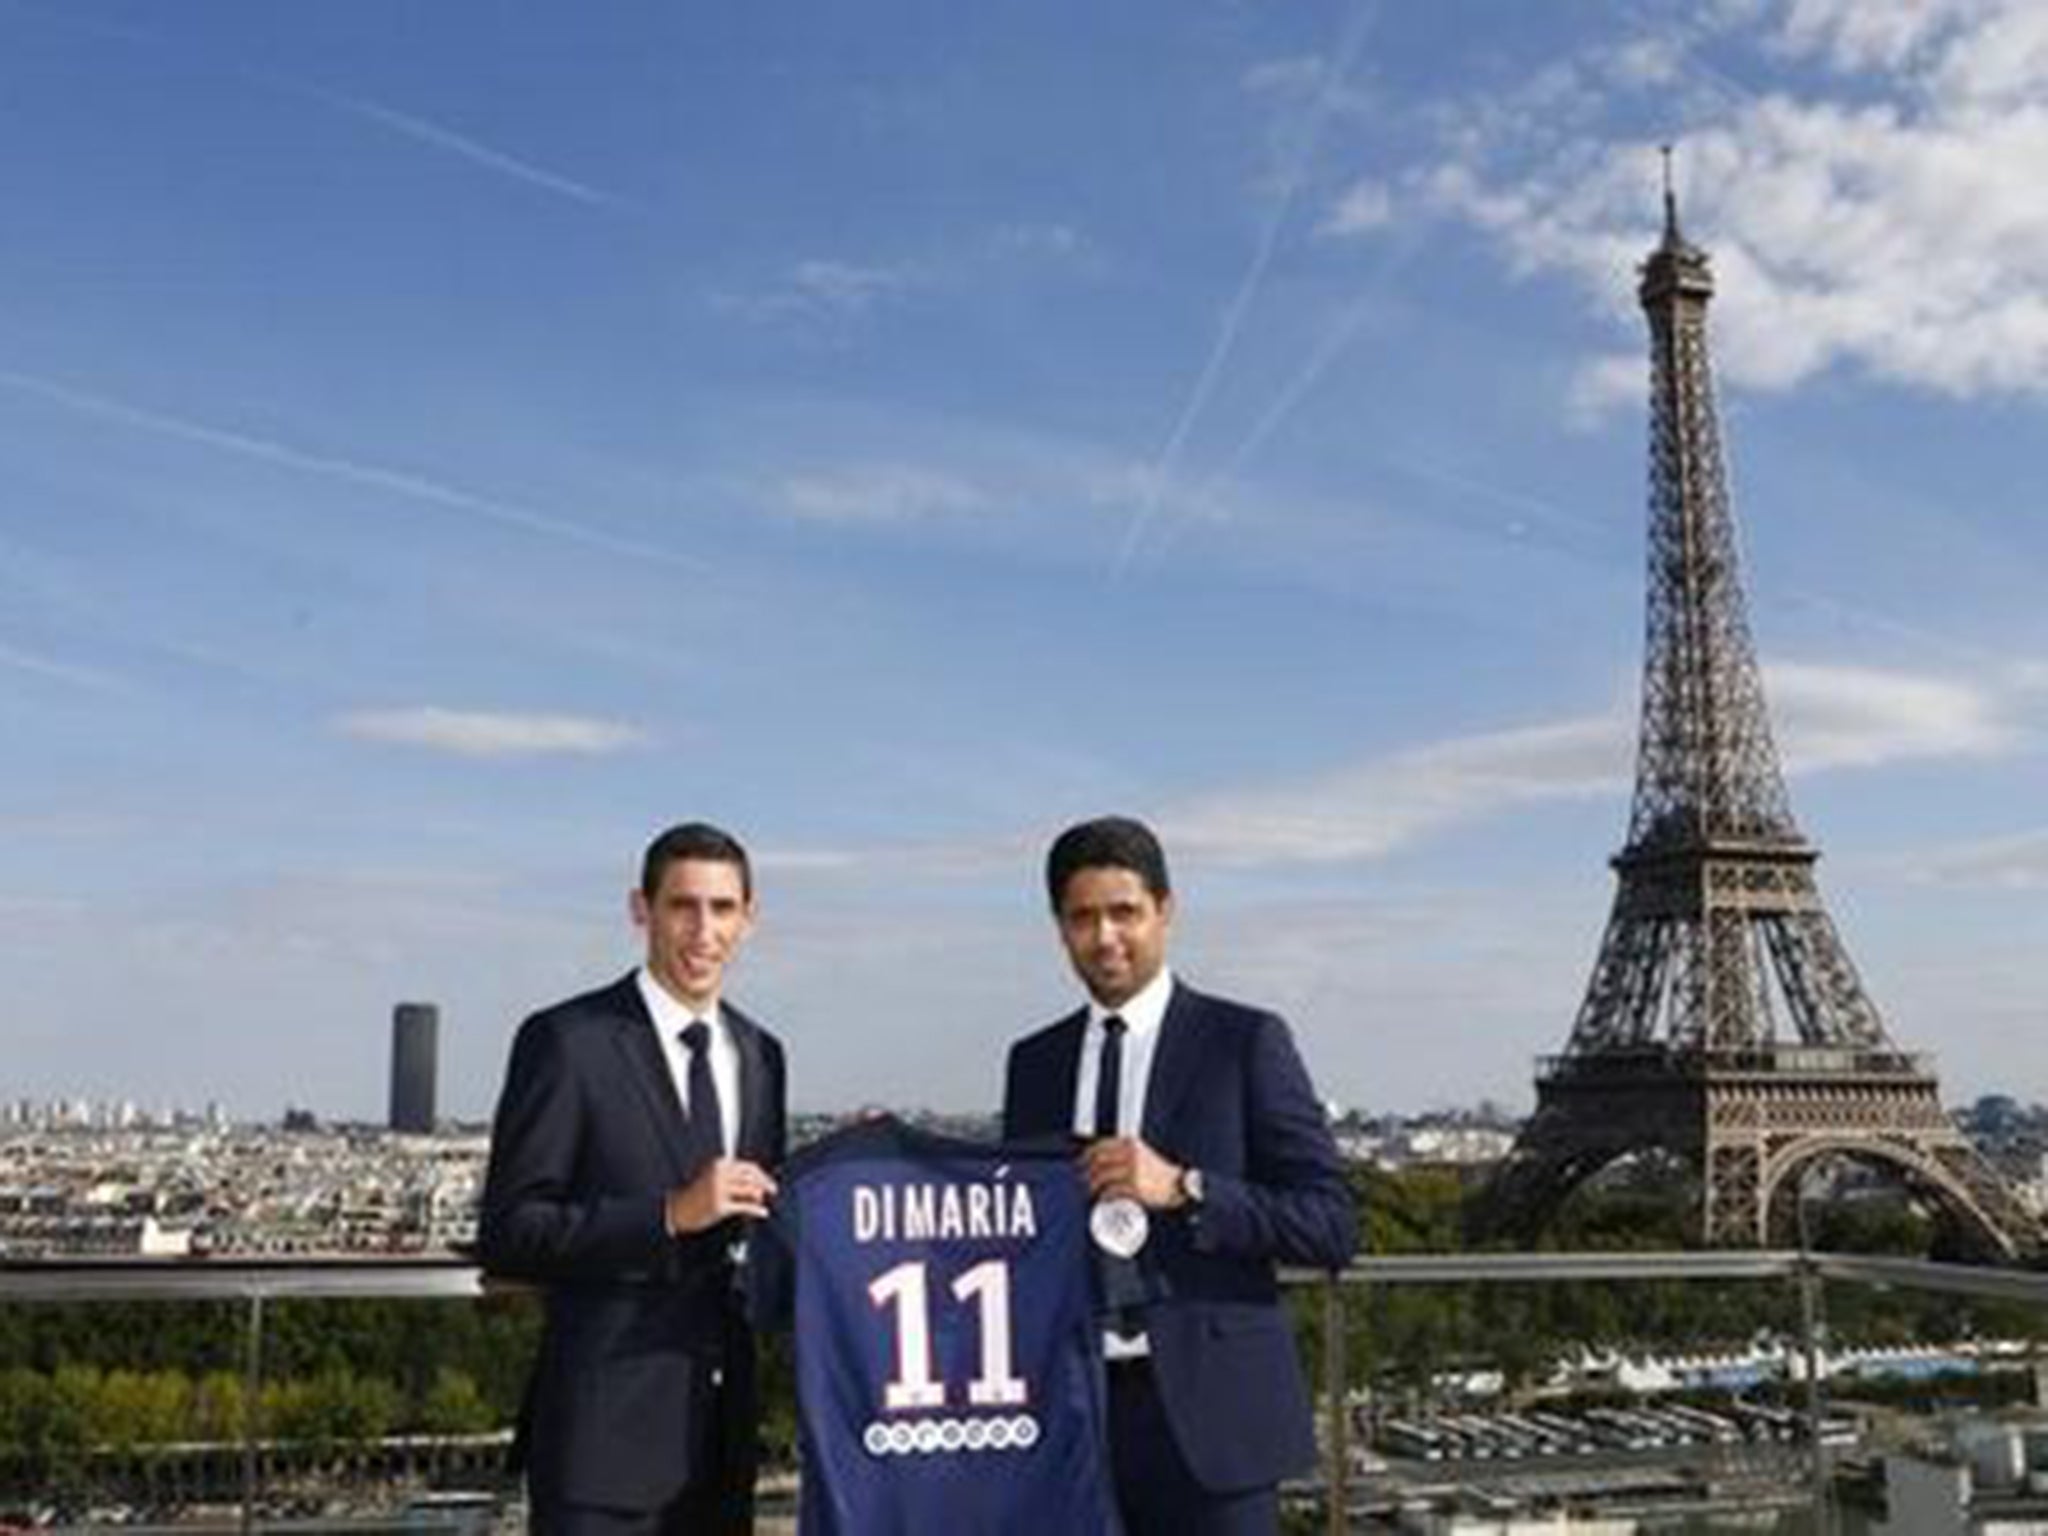 Angel Di Maria poses in front of the Eiffel Tower with his PSG shirt